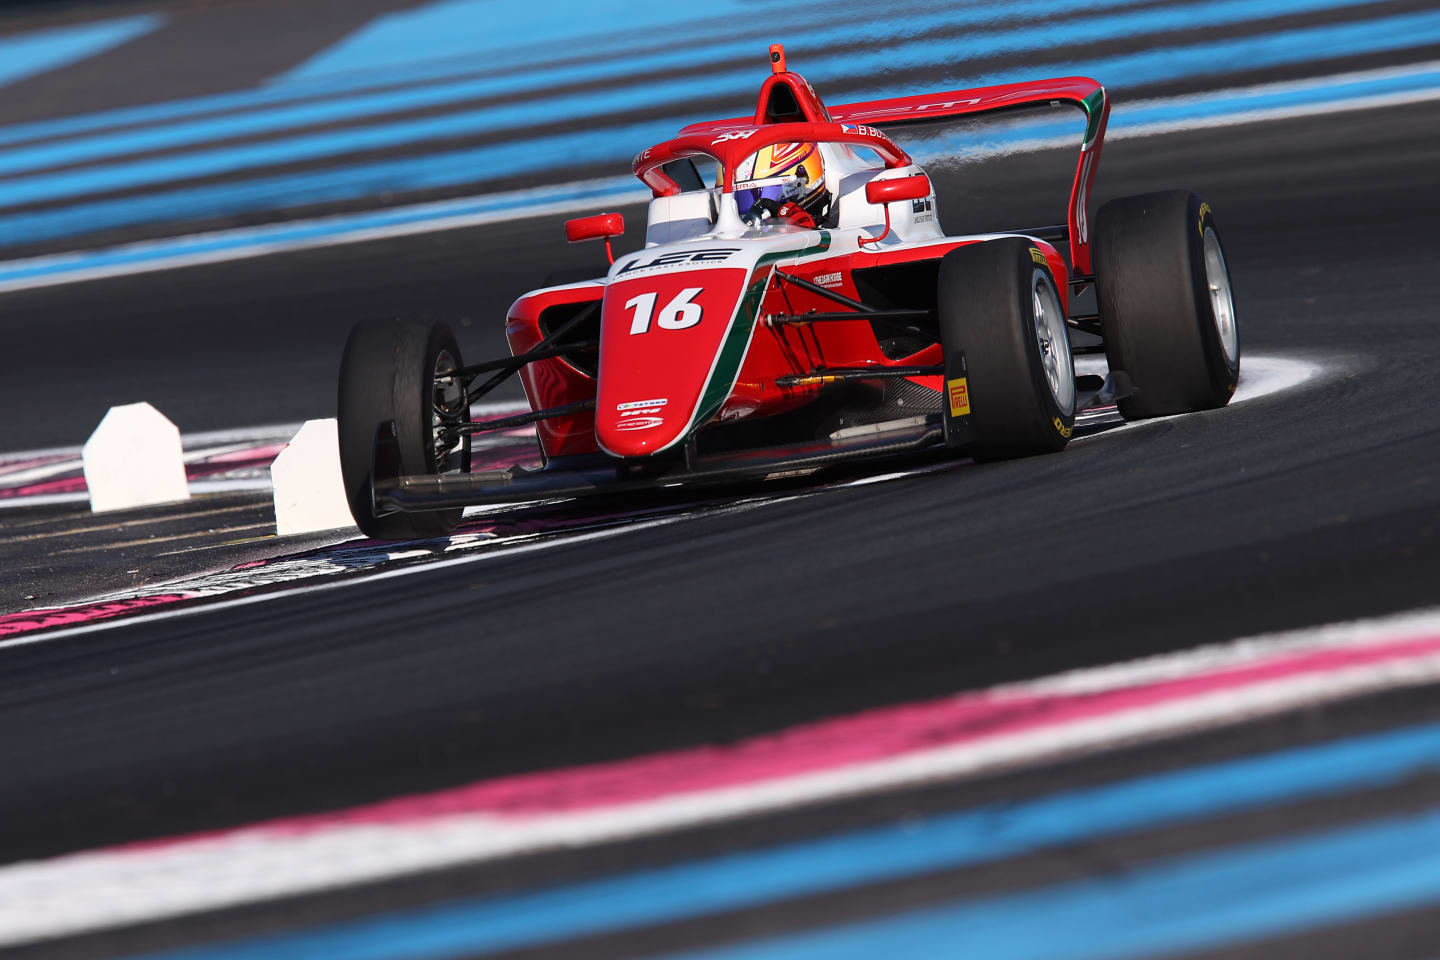 LE CASTELLET, FRANCE - JULY 29: Bianca Bustamante of Philippines and PREMA Racing (16) drives on